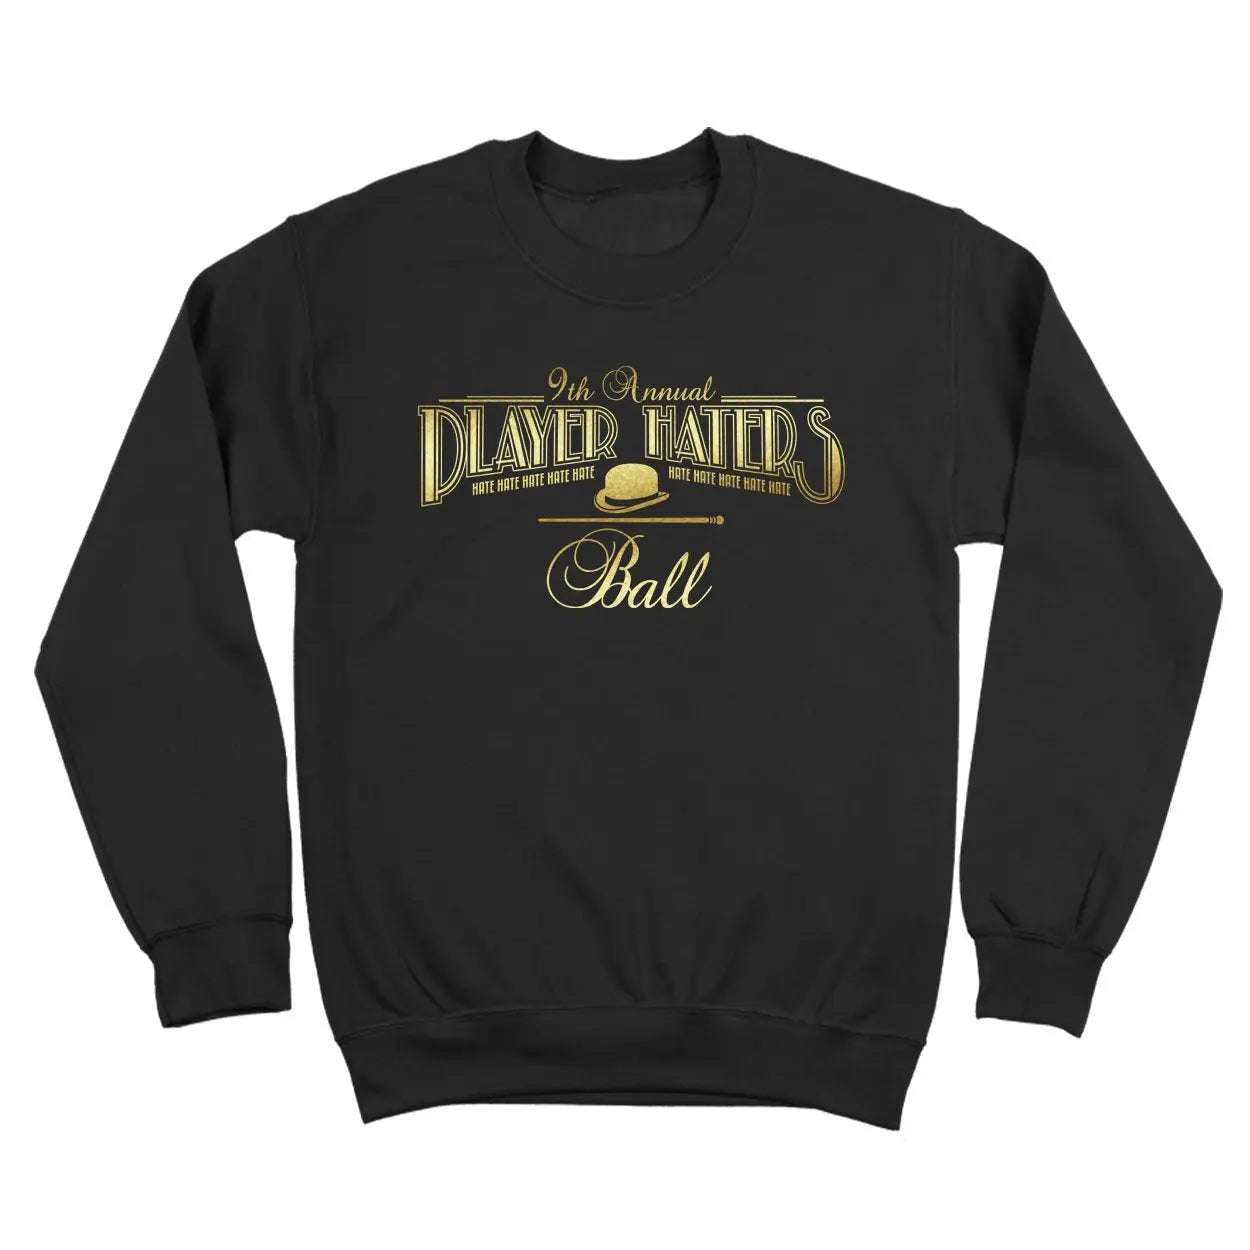 The Player Haters Ball Tshirt - Donkey Tees